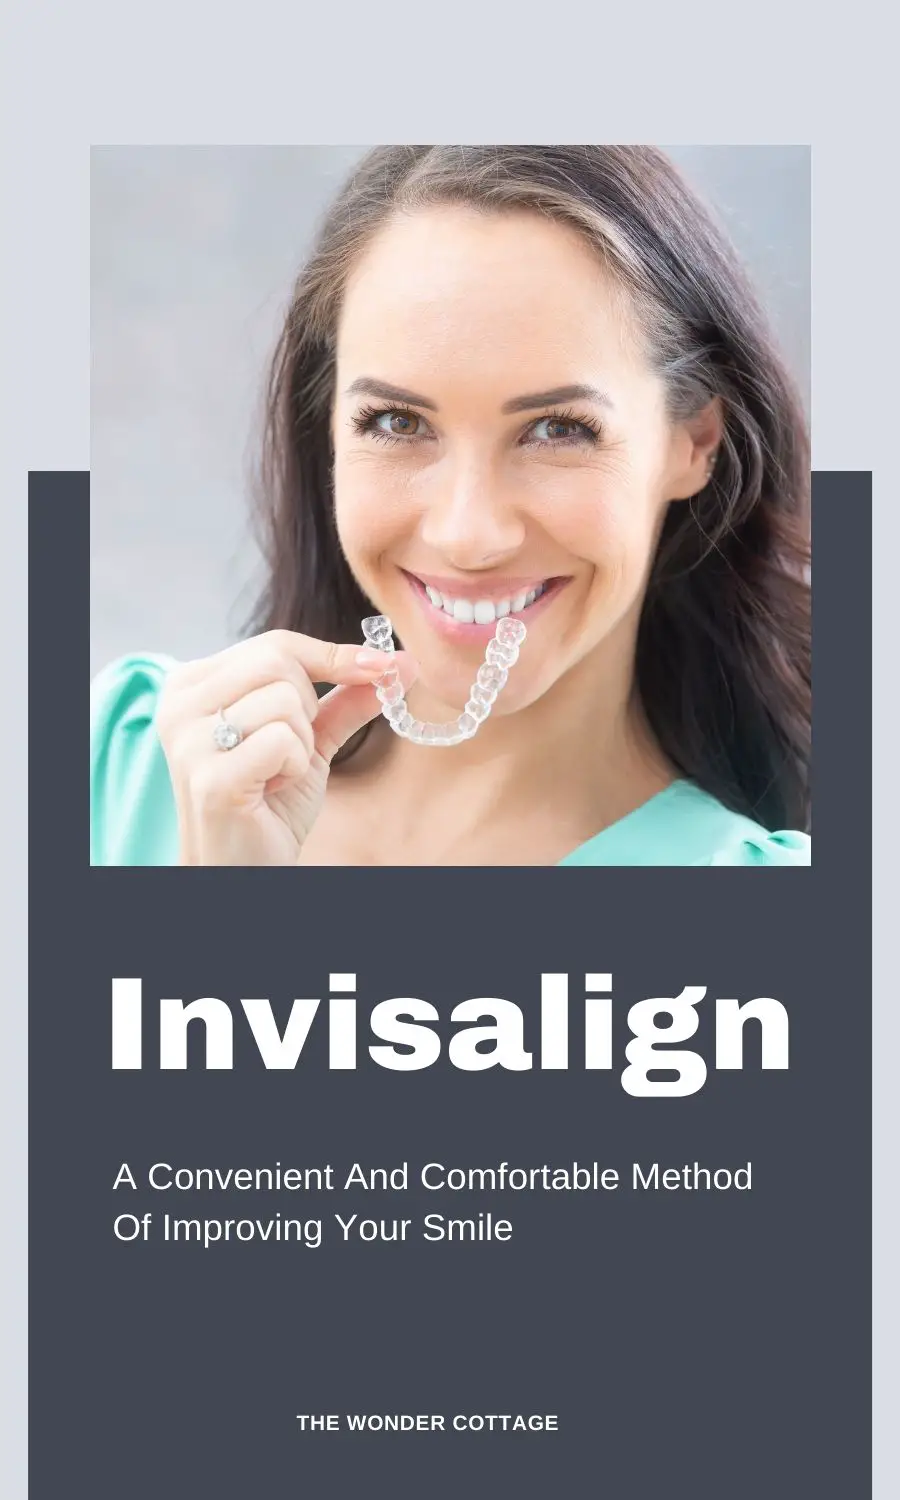 Invisalign – A Convenient And Comfortable Method Of Improving Your Smile